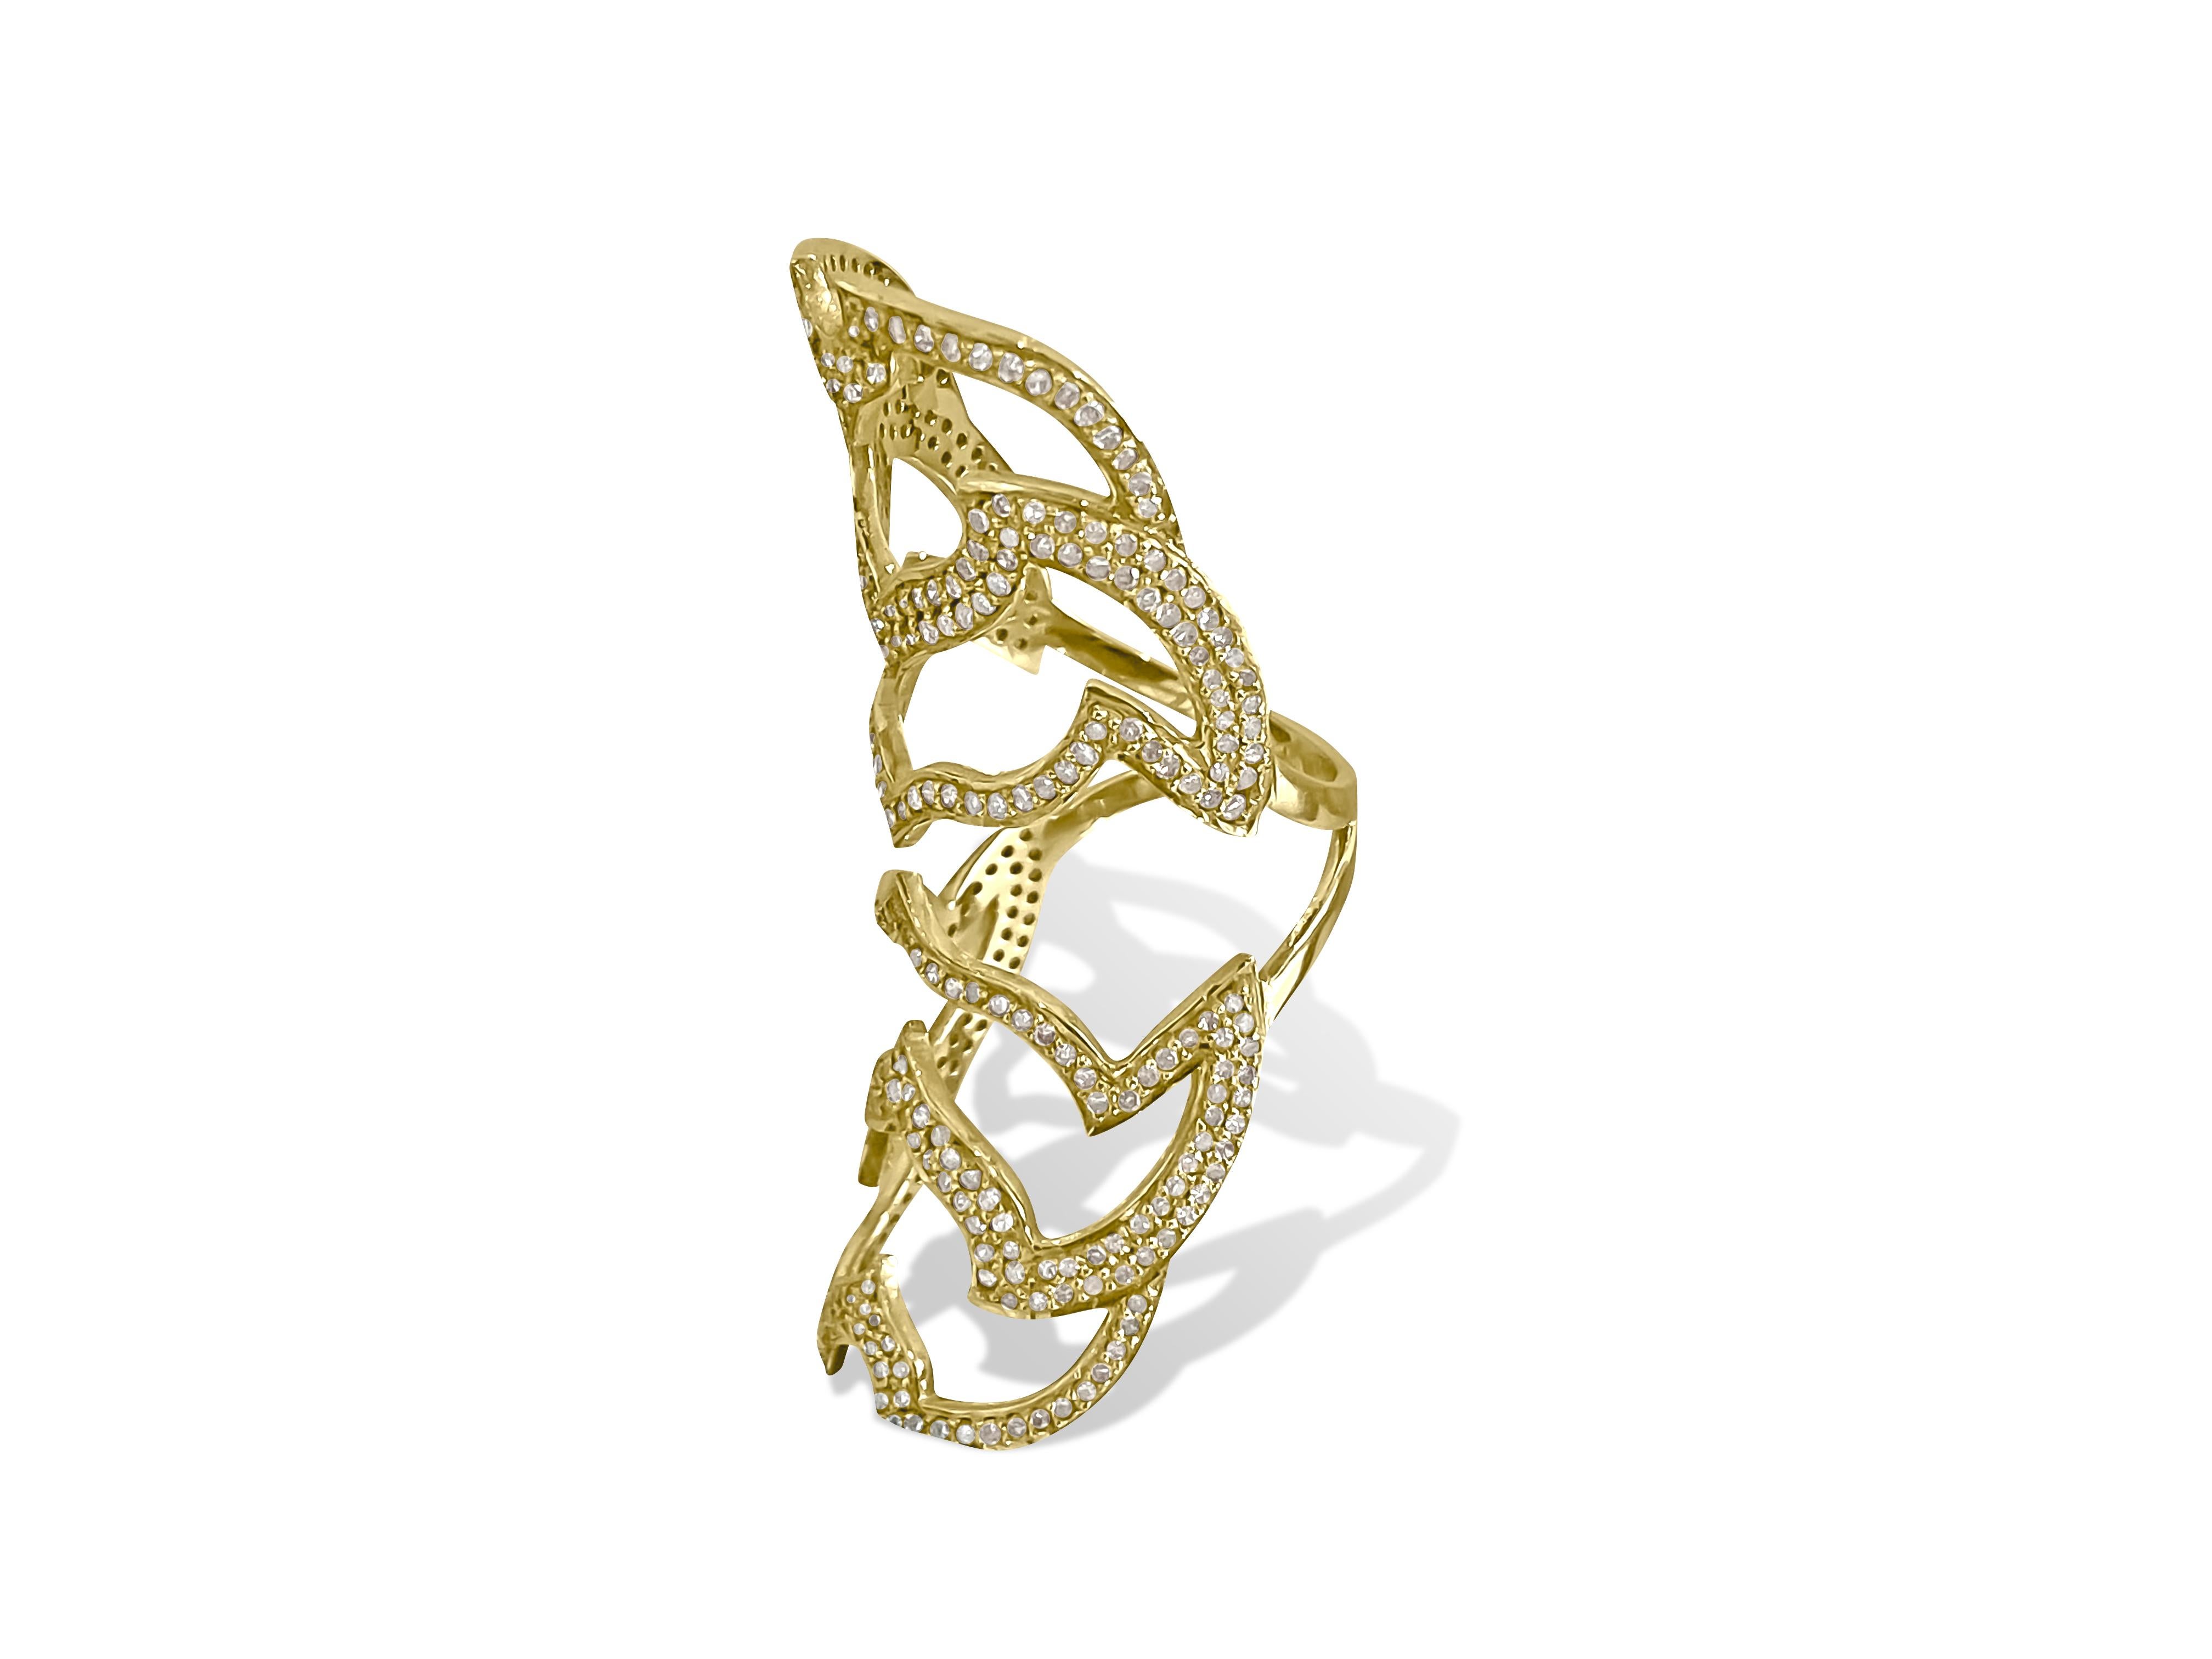 Crafted in 18K yellow gold, this exquisite ring boasts a total carat weight of 1.97 carats of 100% natural earth-mined diamonds, featuring VS-SI clarity and G-H color. With its contemporary design and elegant appeal, this cocktail ring is the